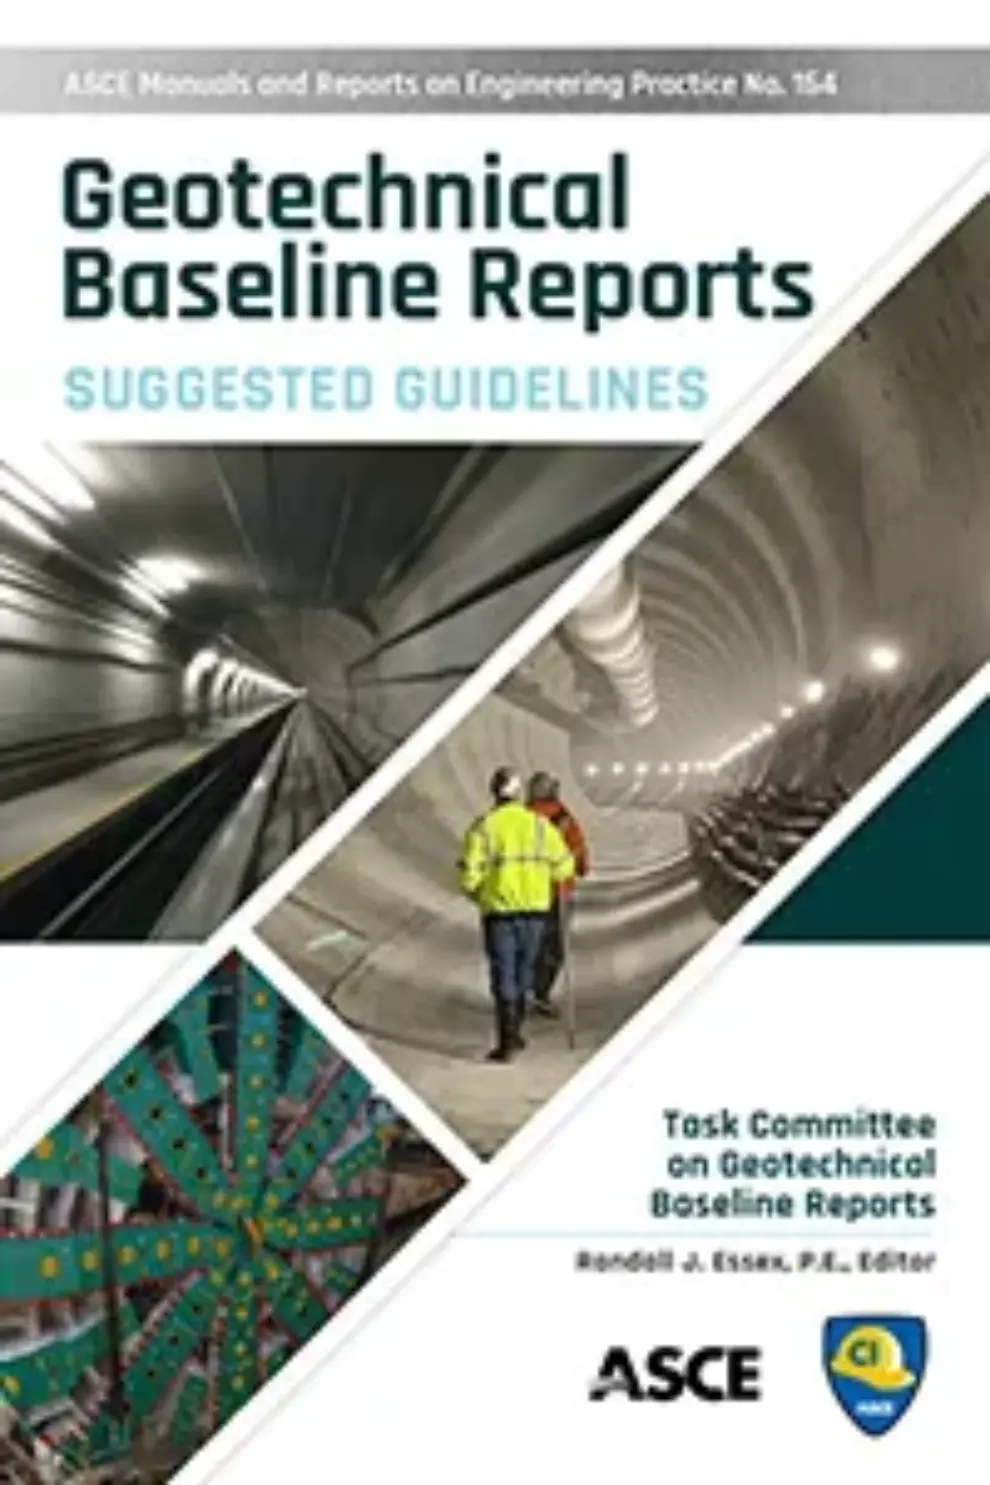 <a><strong>ASCE Manual of Practice 154 Provides Guidance for Geotechnical Baseline Reports</strong></a>